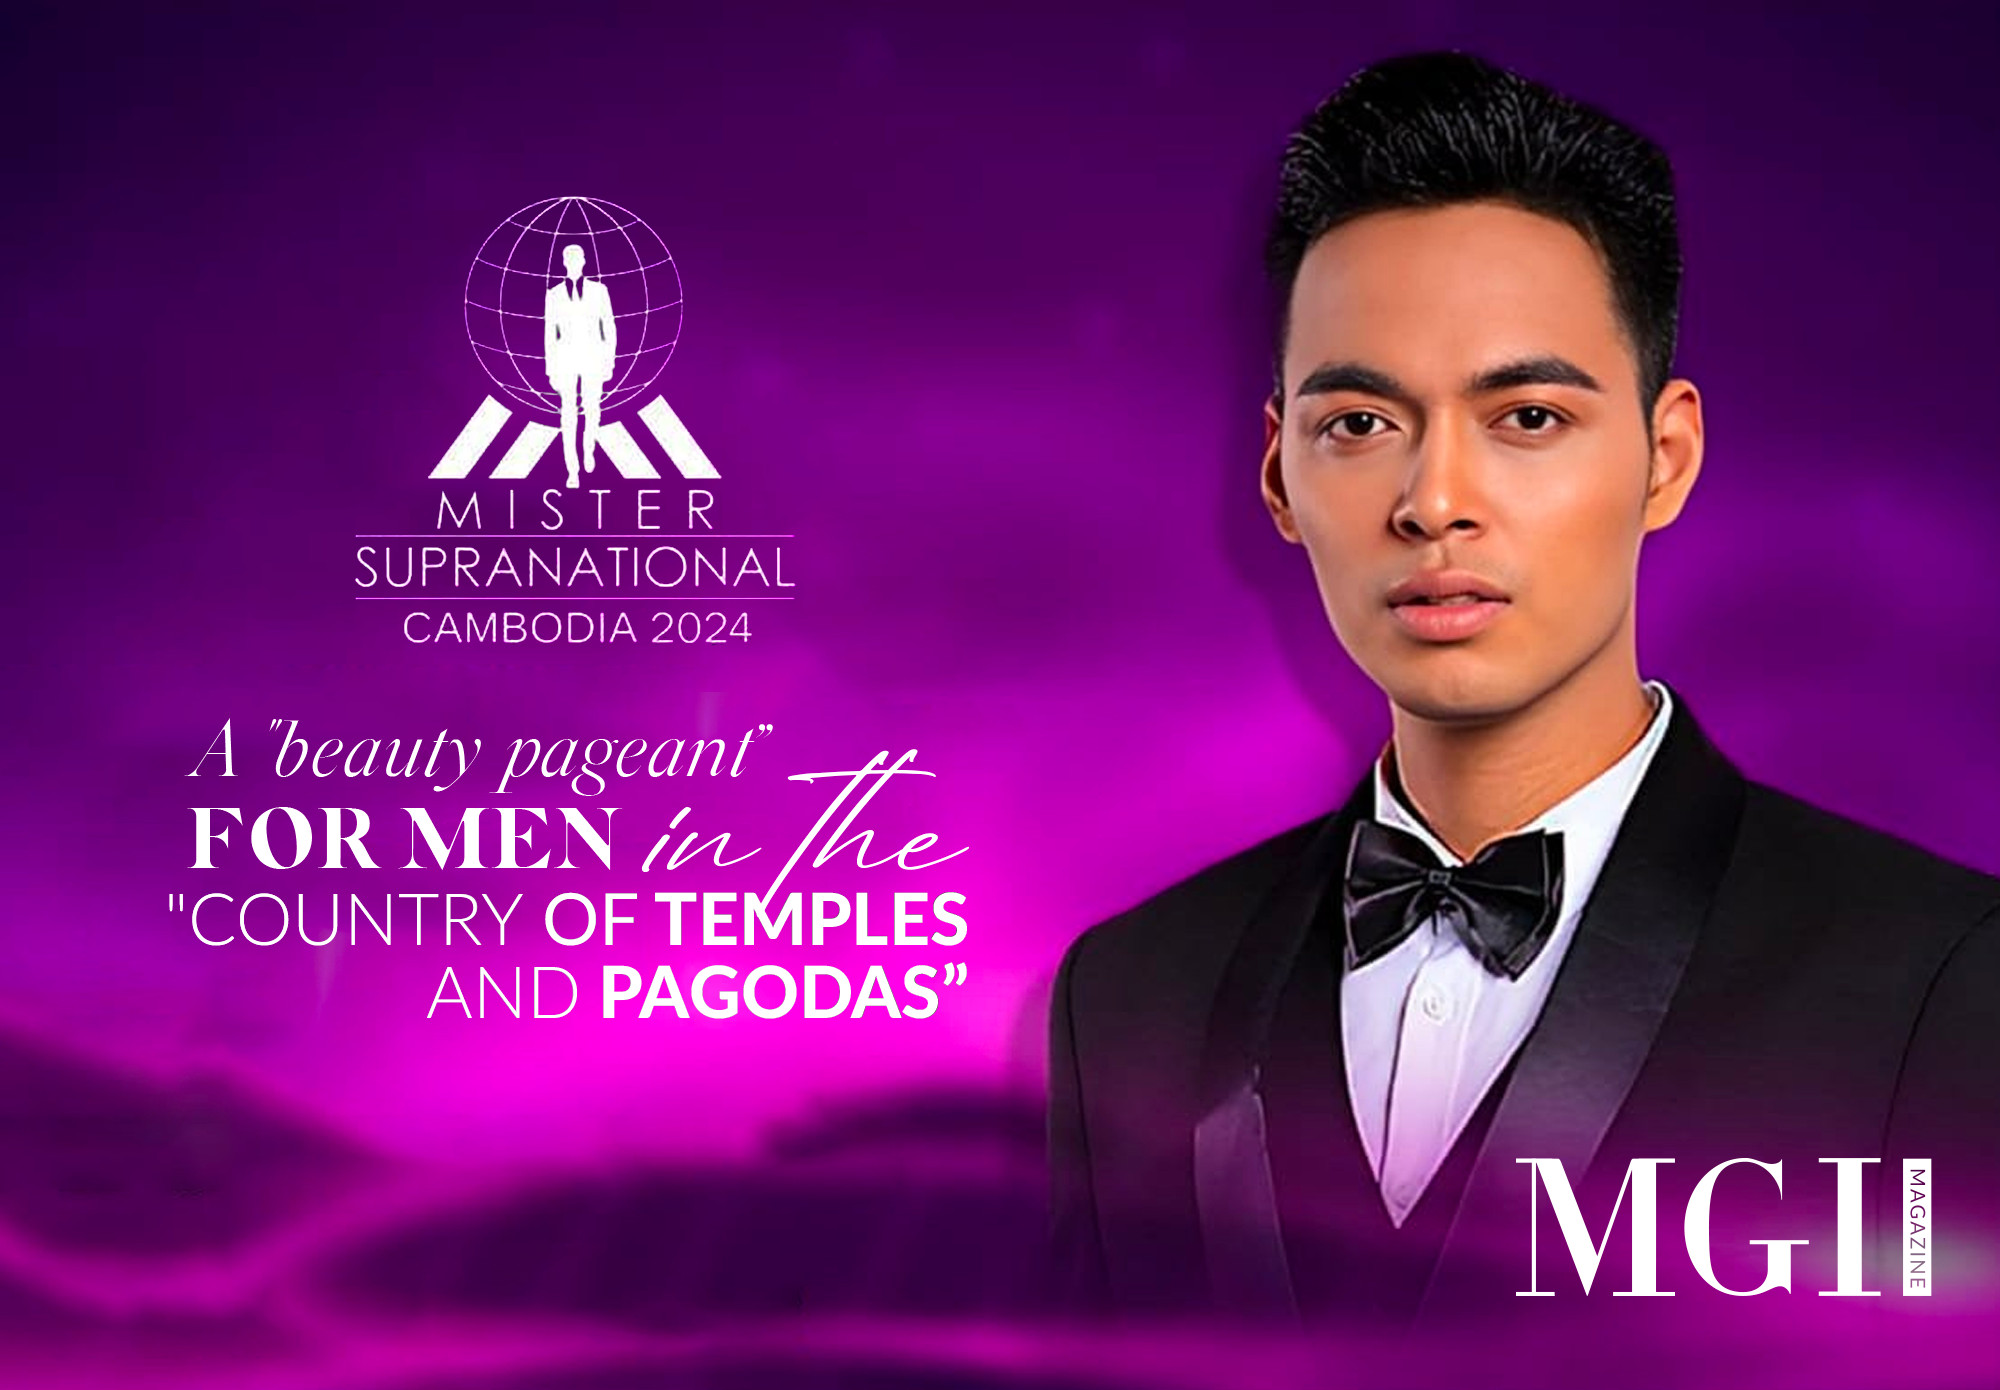 Mister Supranational Cambodia 2024 - A "beauty pageant” for men in the "Country of Temples and Pagodas”